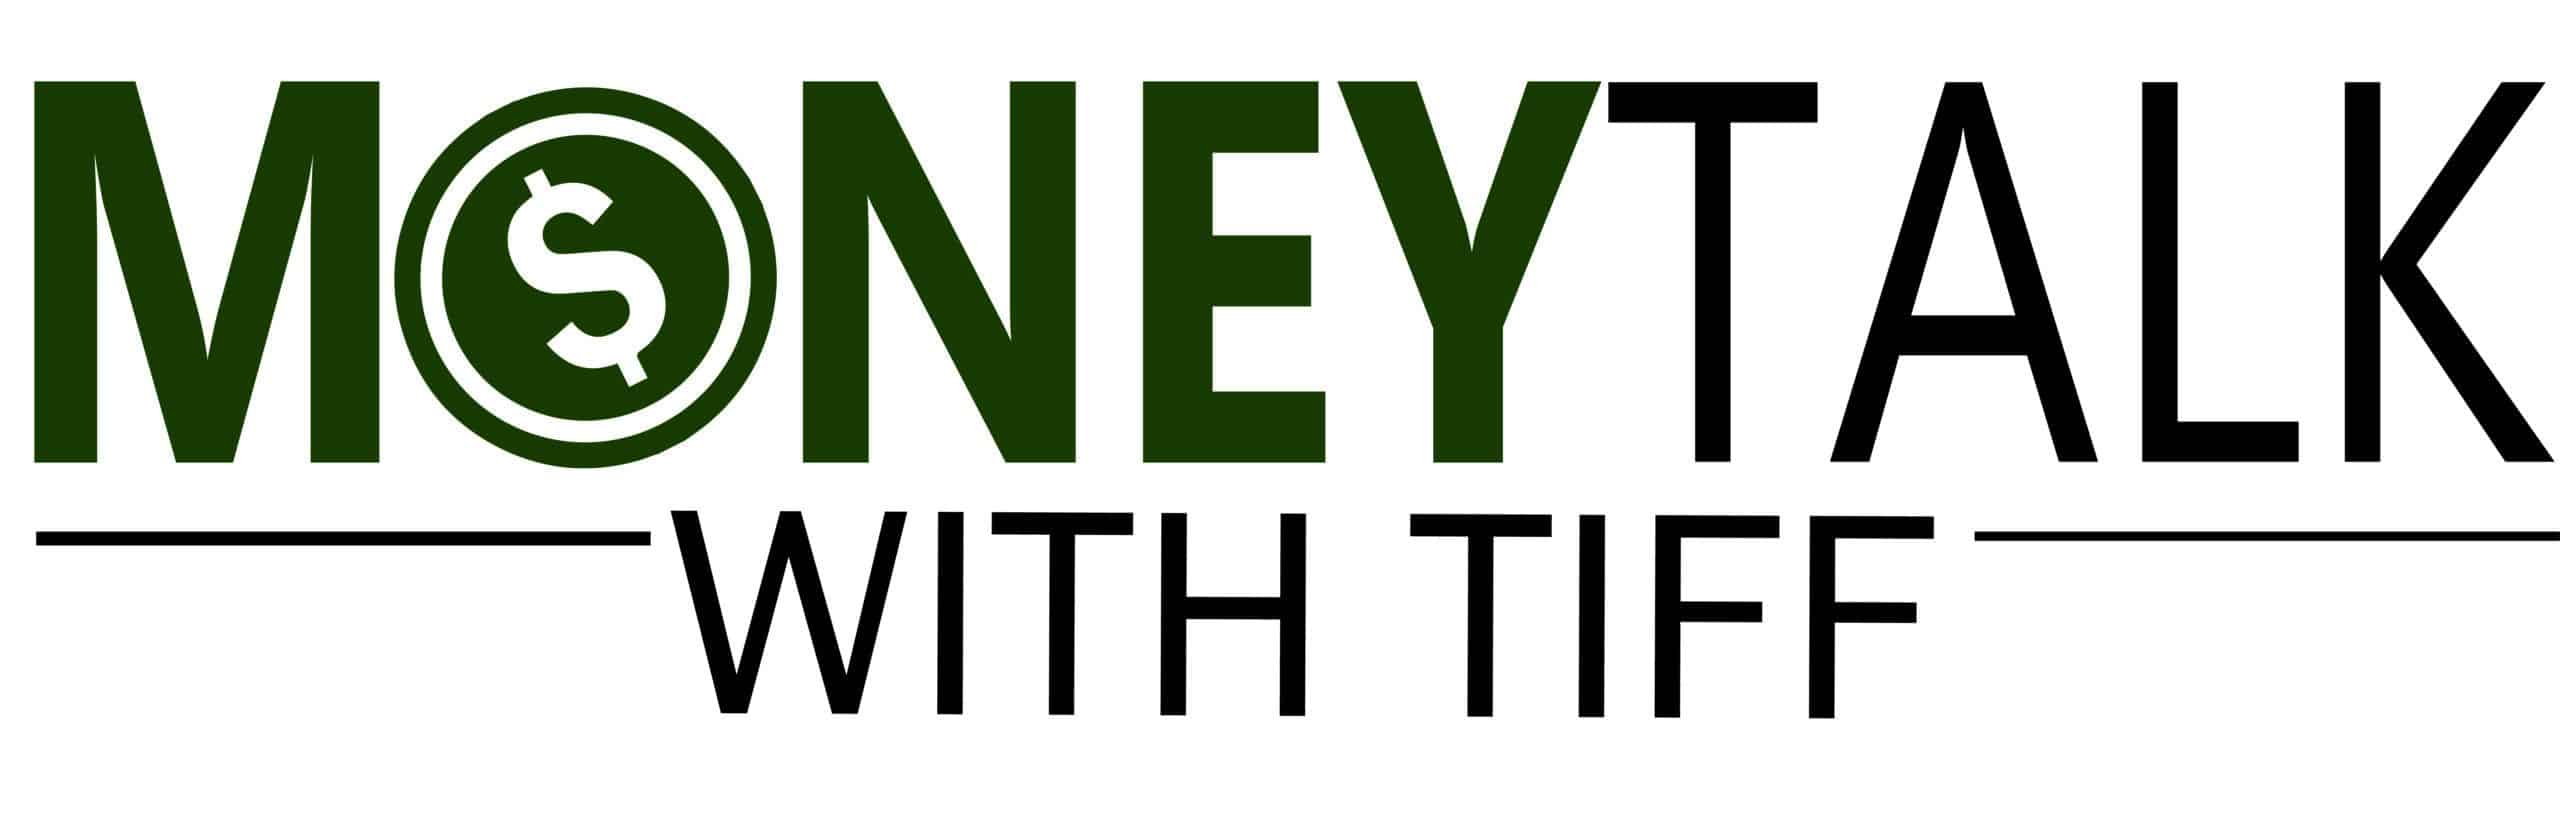 Money talk with tiff: a financial podcast or show concept logo.